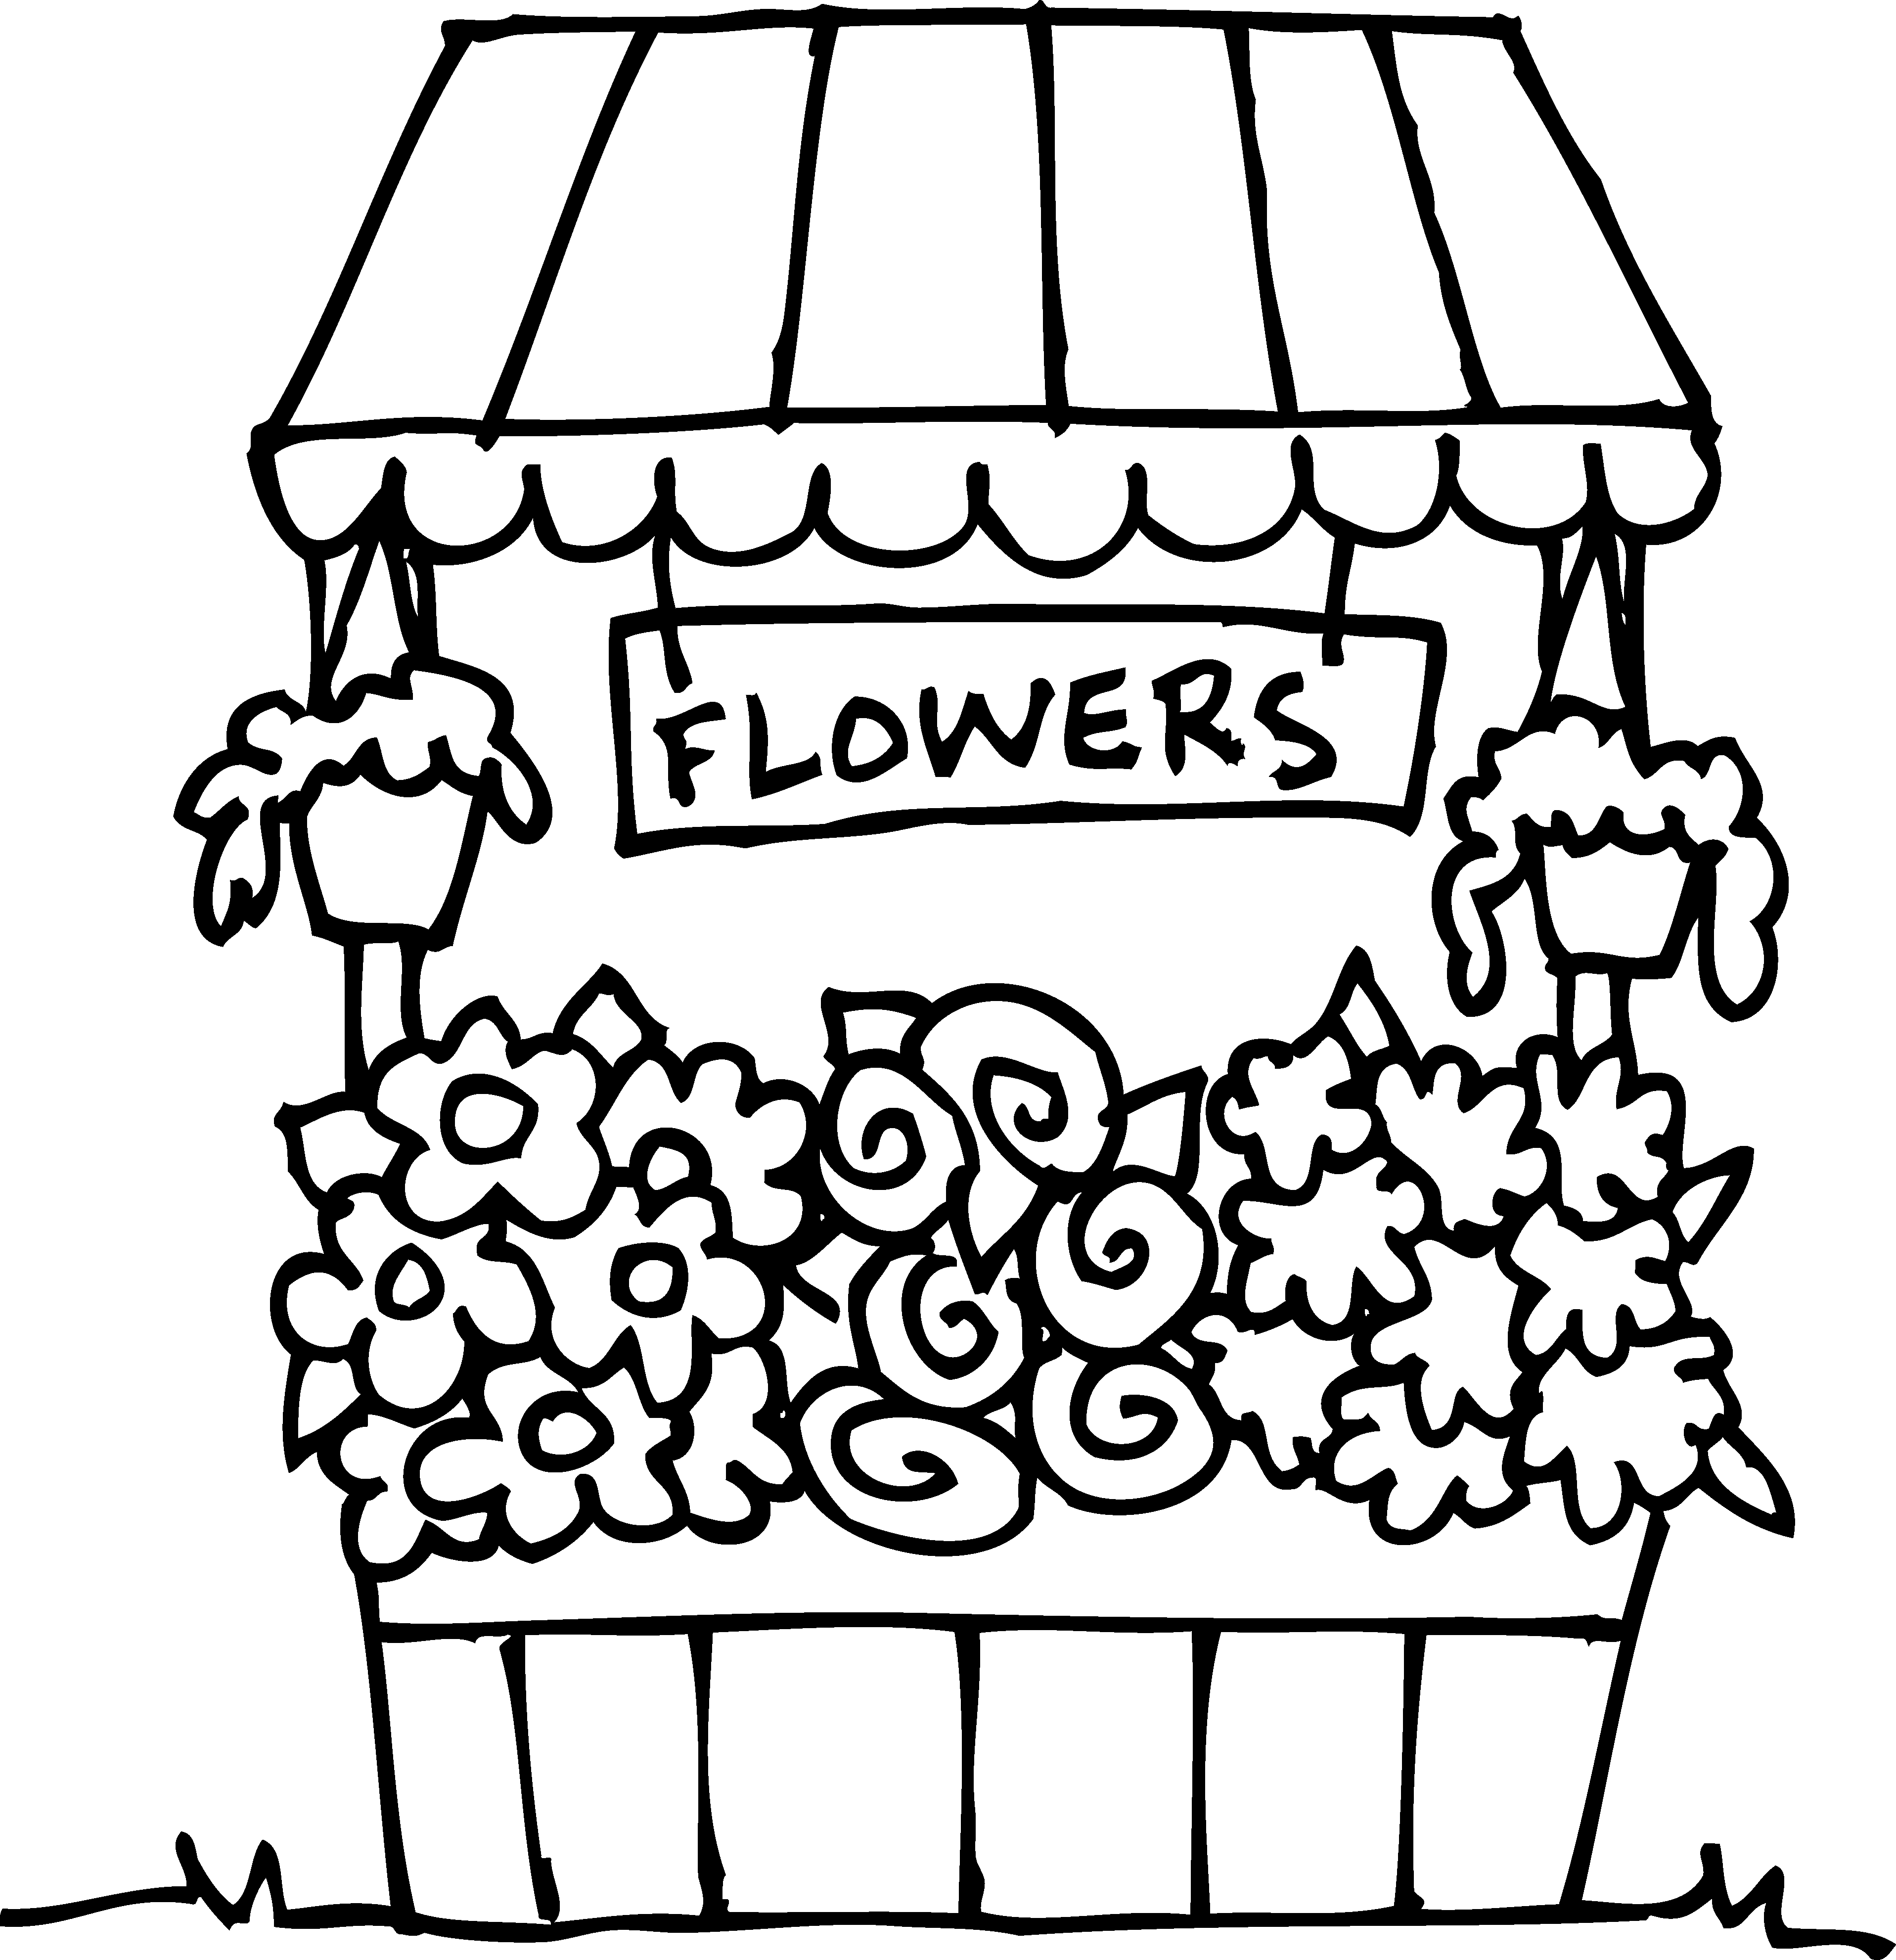 flower-shop-clipart-black-and-white-clip-art-library